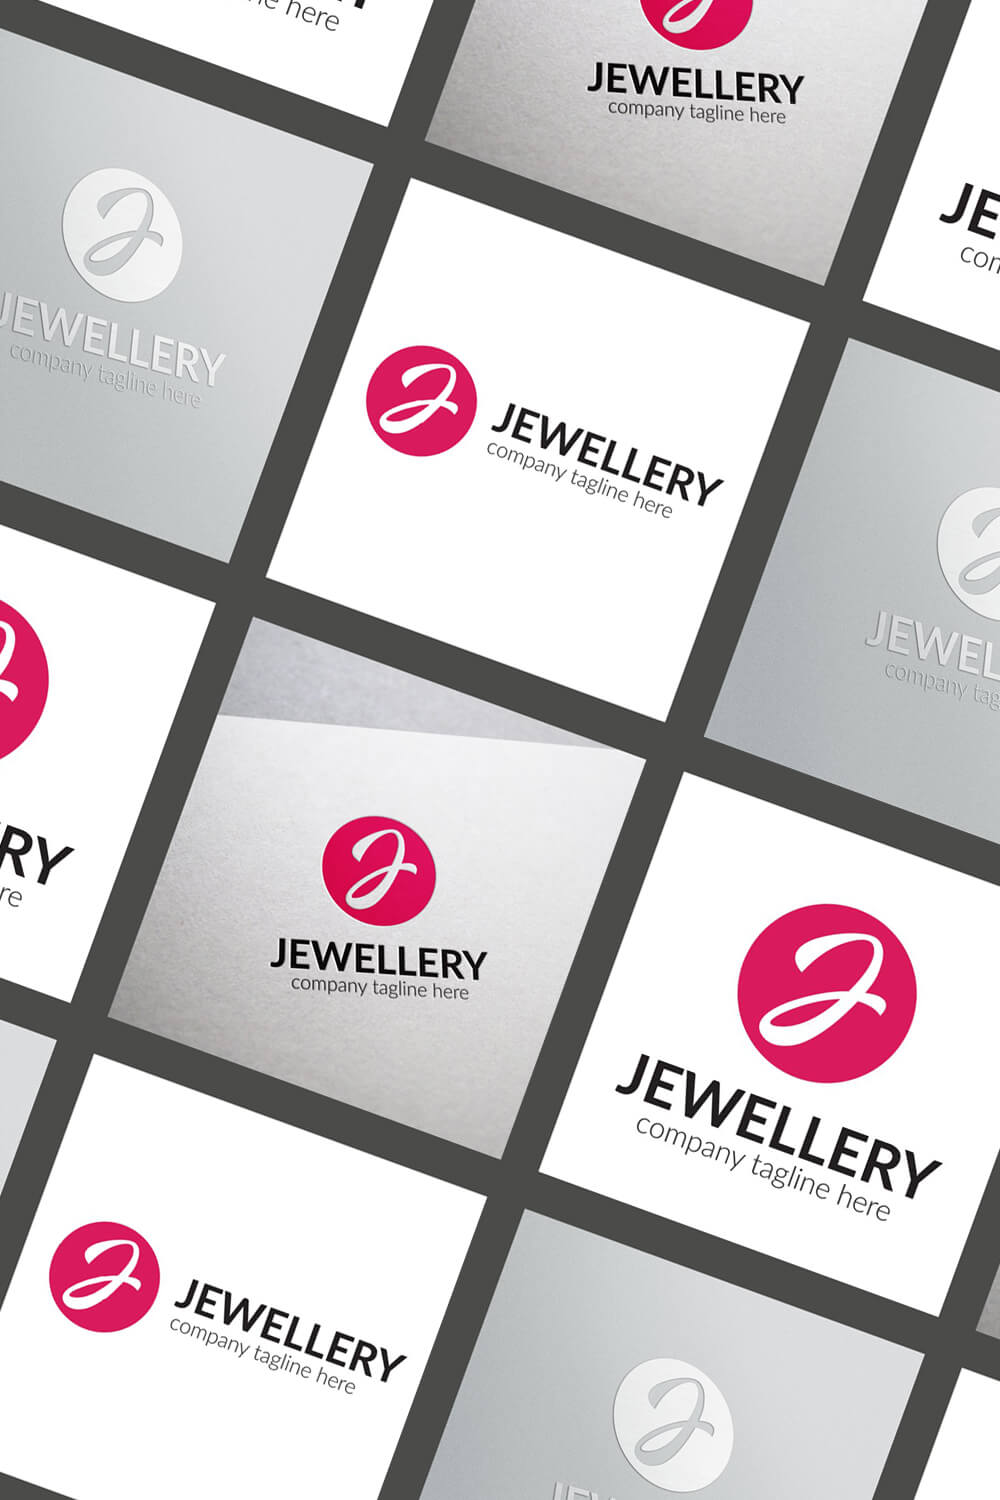 J jewelry logos in square frames tiled at an angle on a gray background.